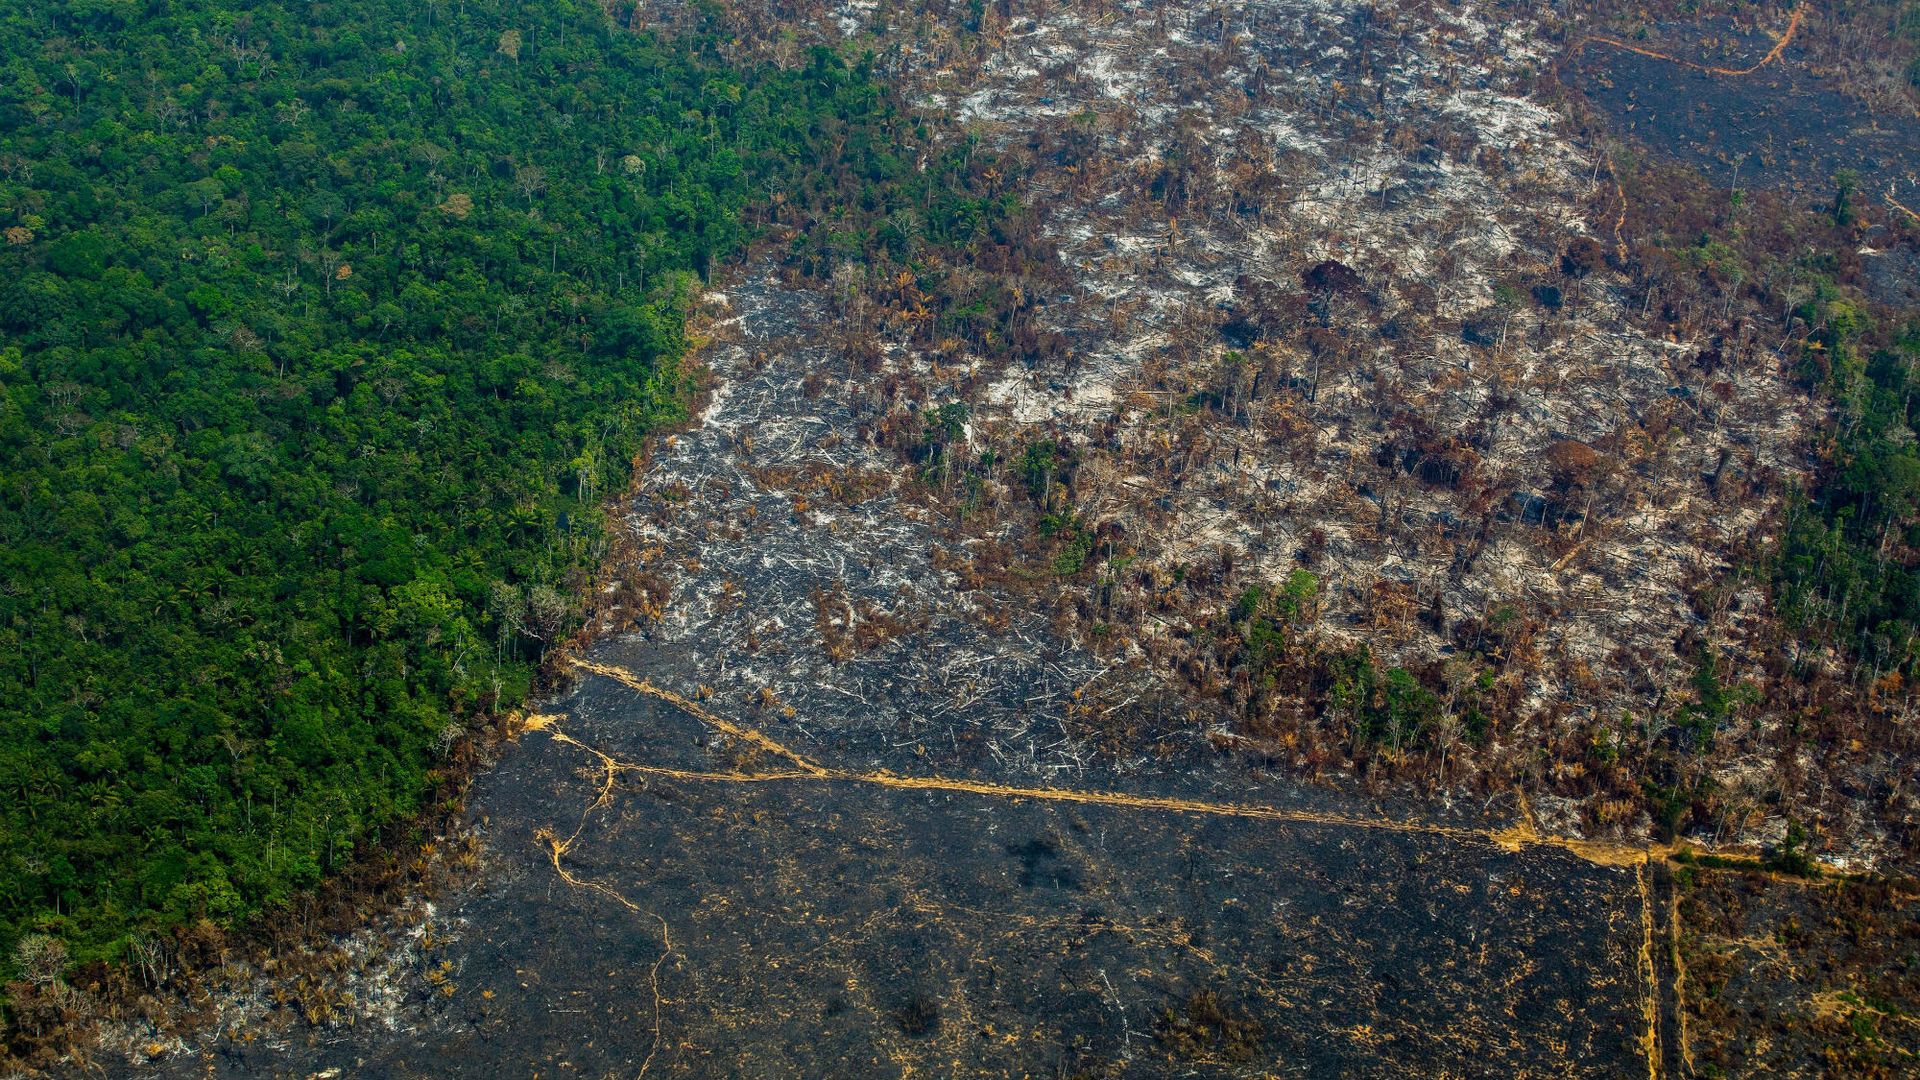 The Amazon rainforest is still burning, and the destruction is